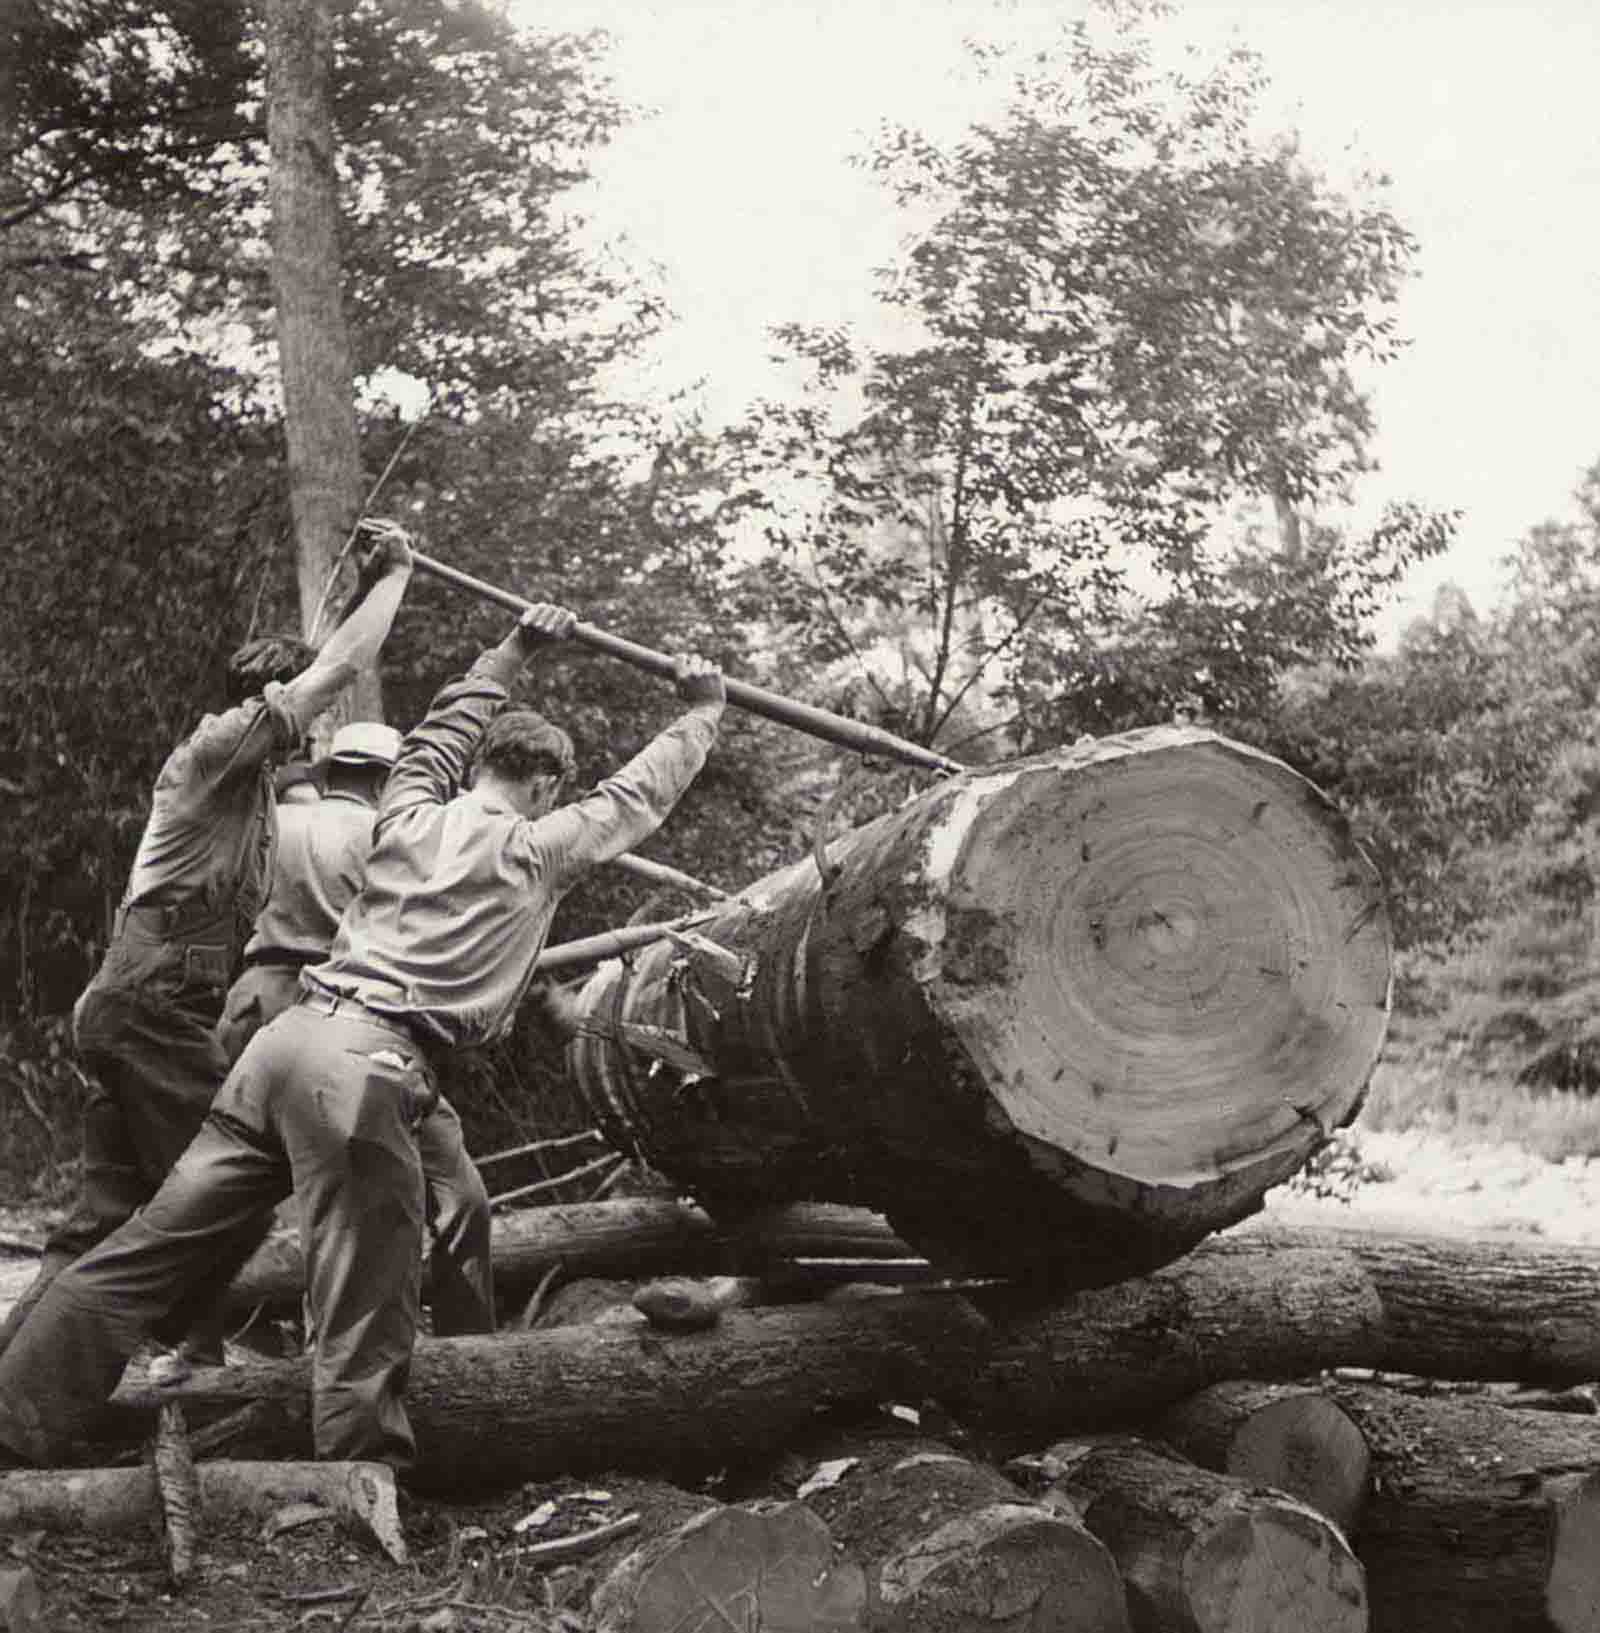 A group in the 1930s moves a log into a river in West Virginia